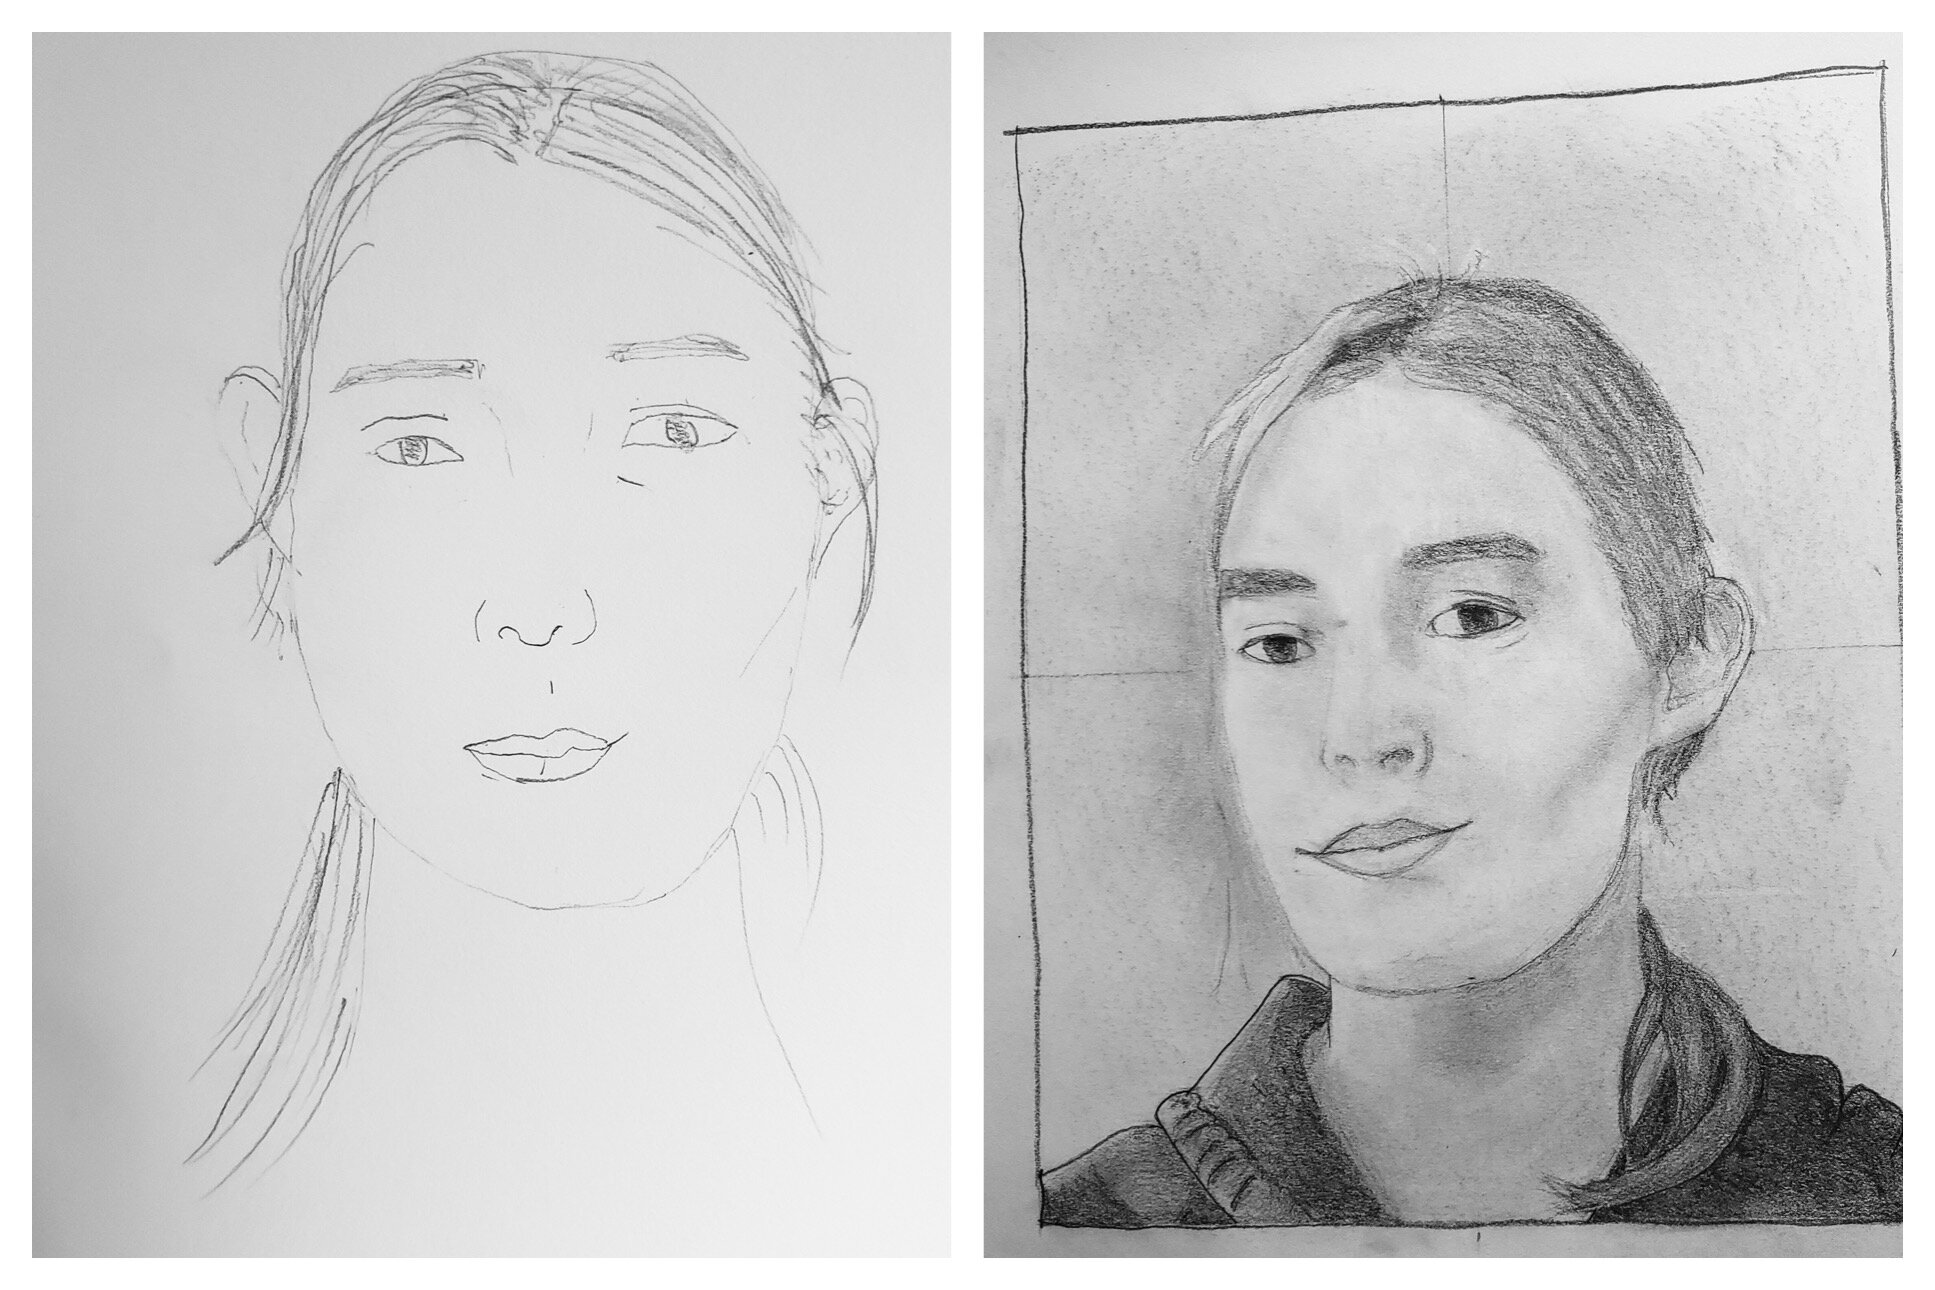 19 year old Maria's before and after self portraits May 24-29, 2021 